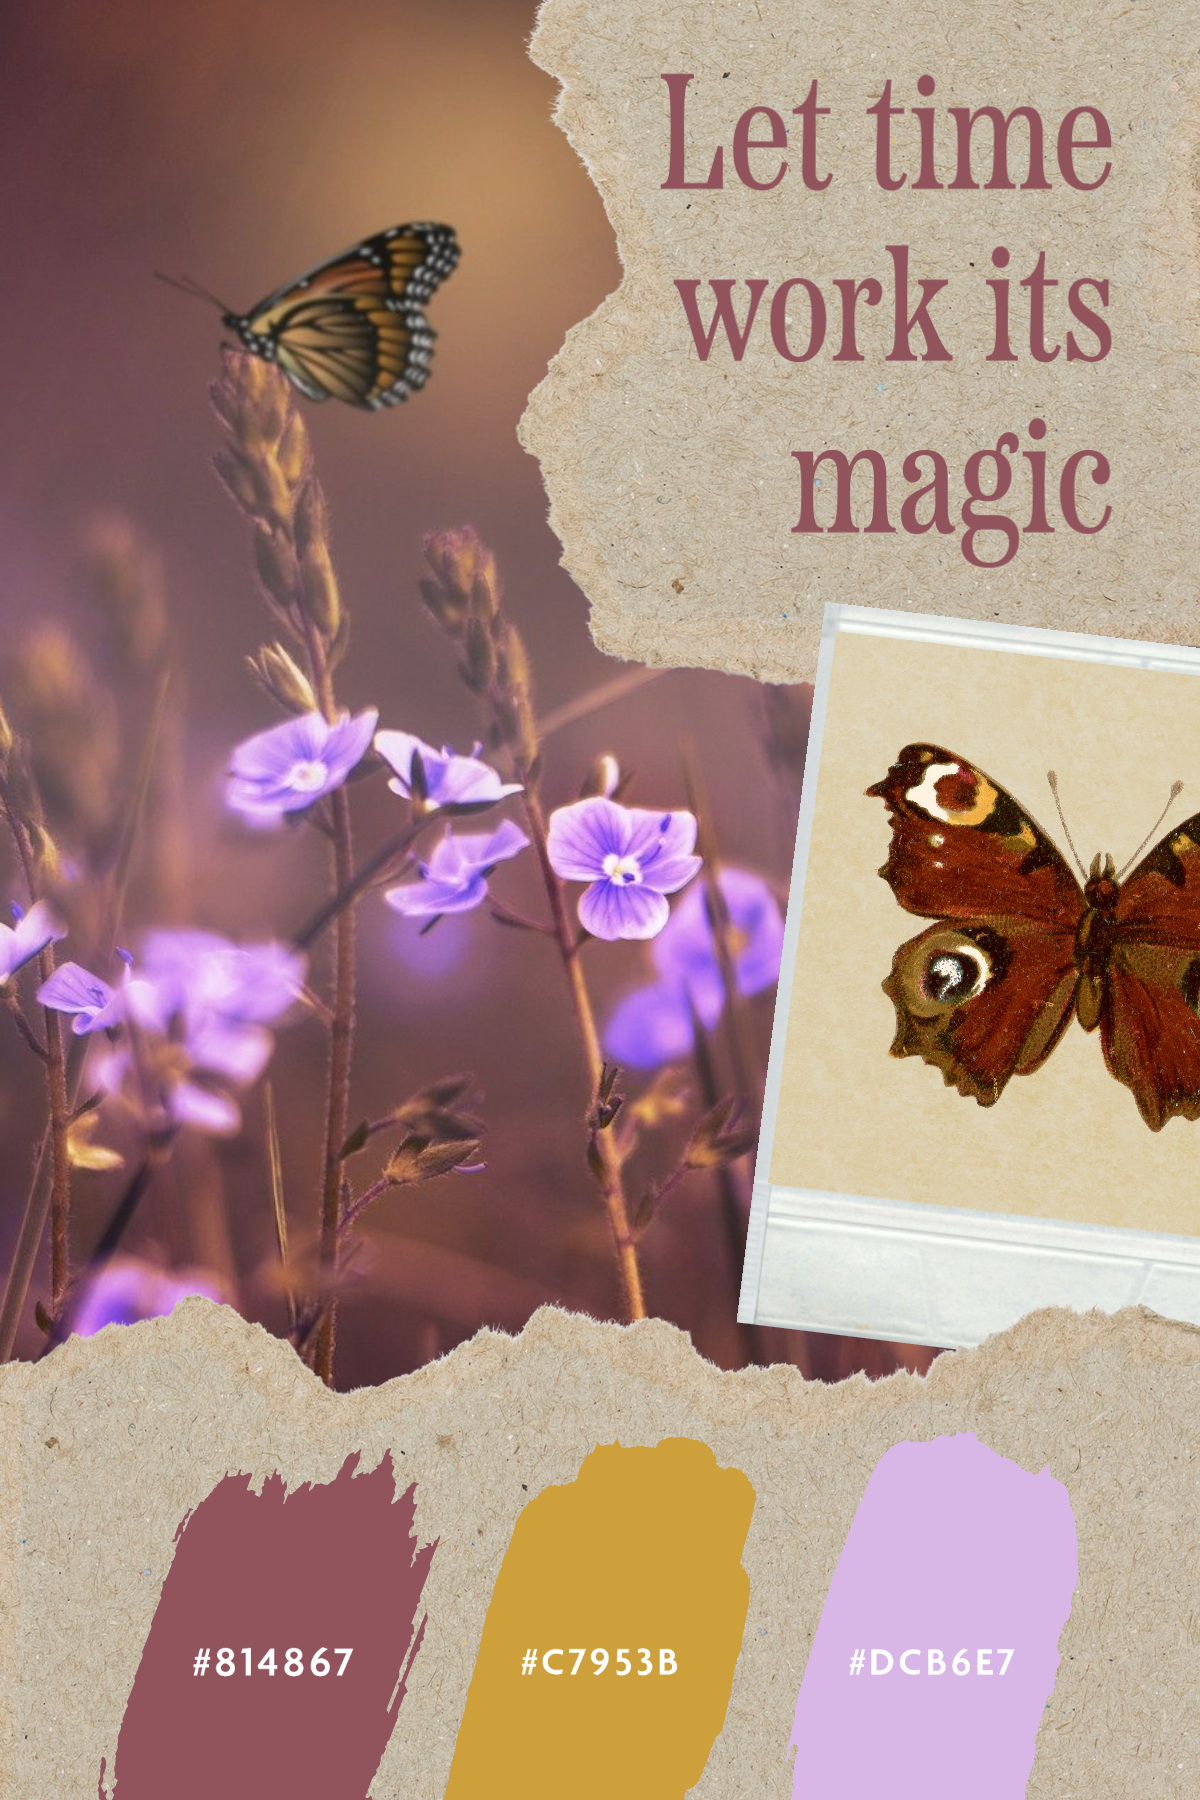 Butterfly and Flowers Color Moodboard Pinterest Post  Let time work its magic #814867 #dcb6e7 #c7953b